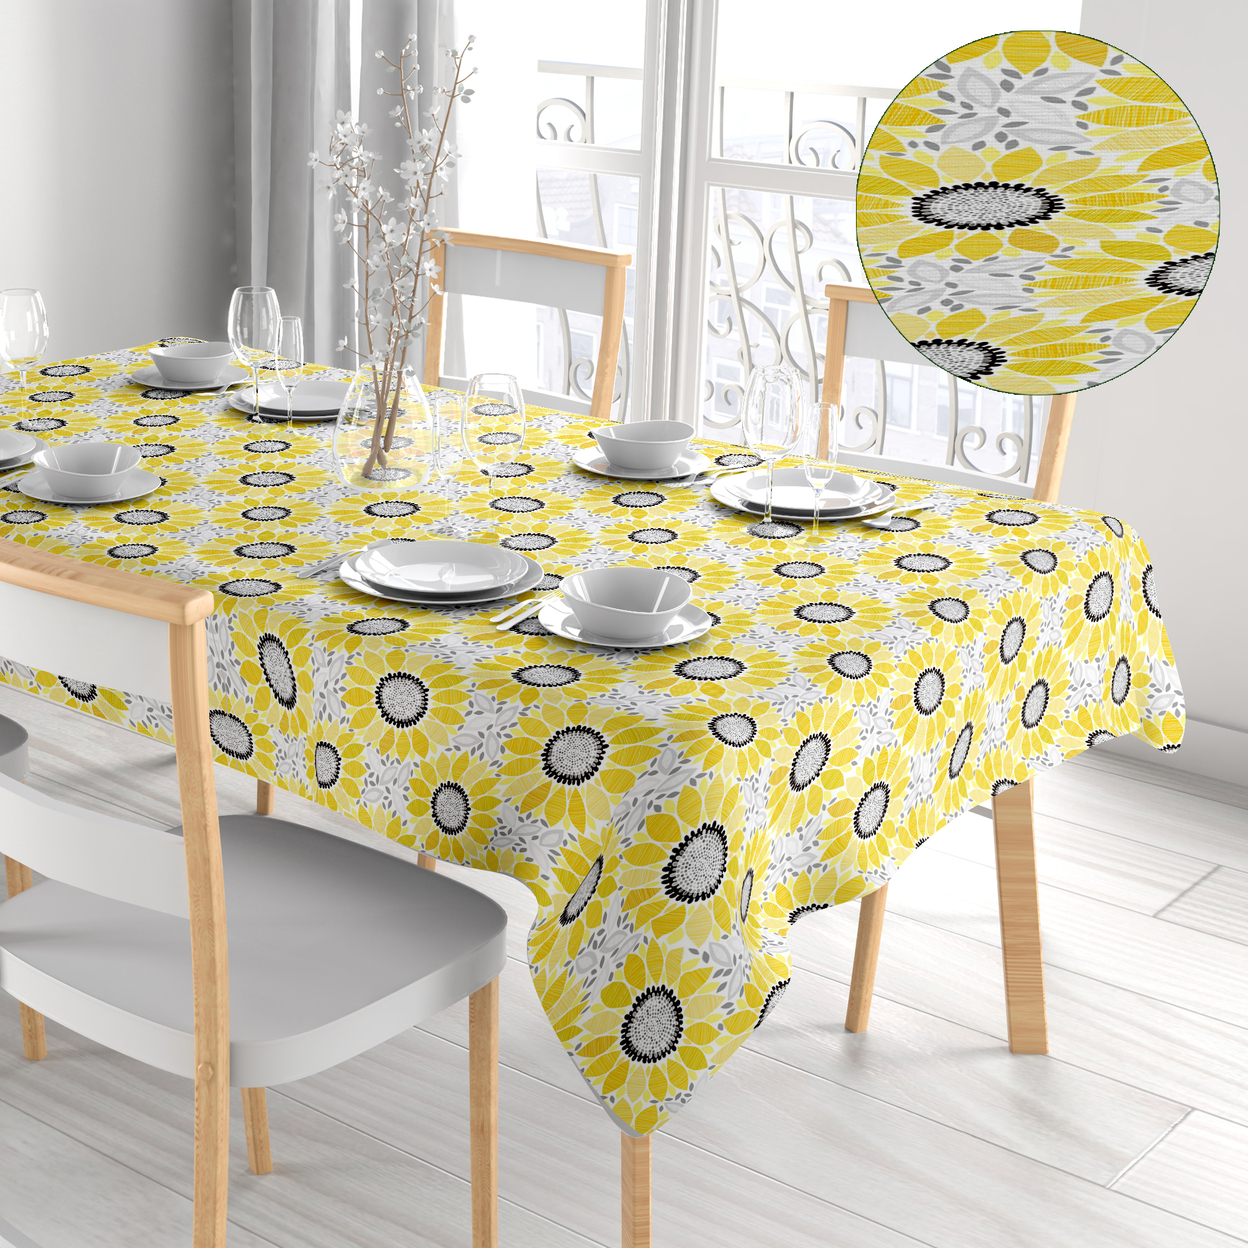 2-Pack: Kitchen Dining Water-Resistant Oil Proof Flannel Back PVC Vinyl Tablecloth - 52'' X 52'', Print